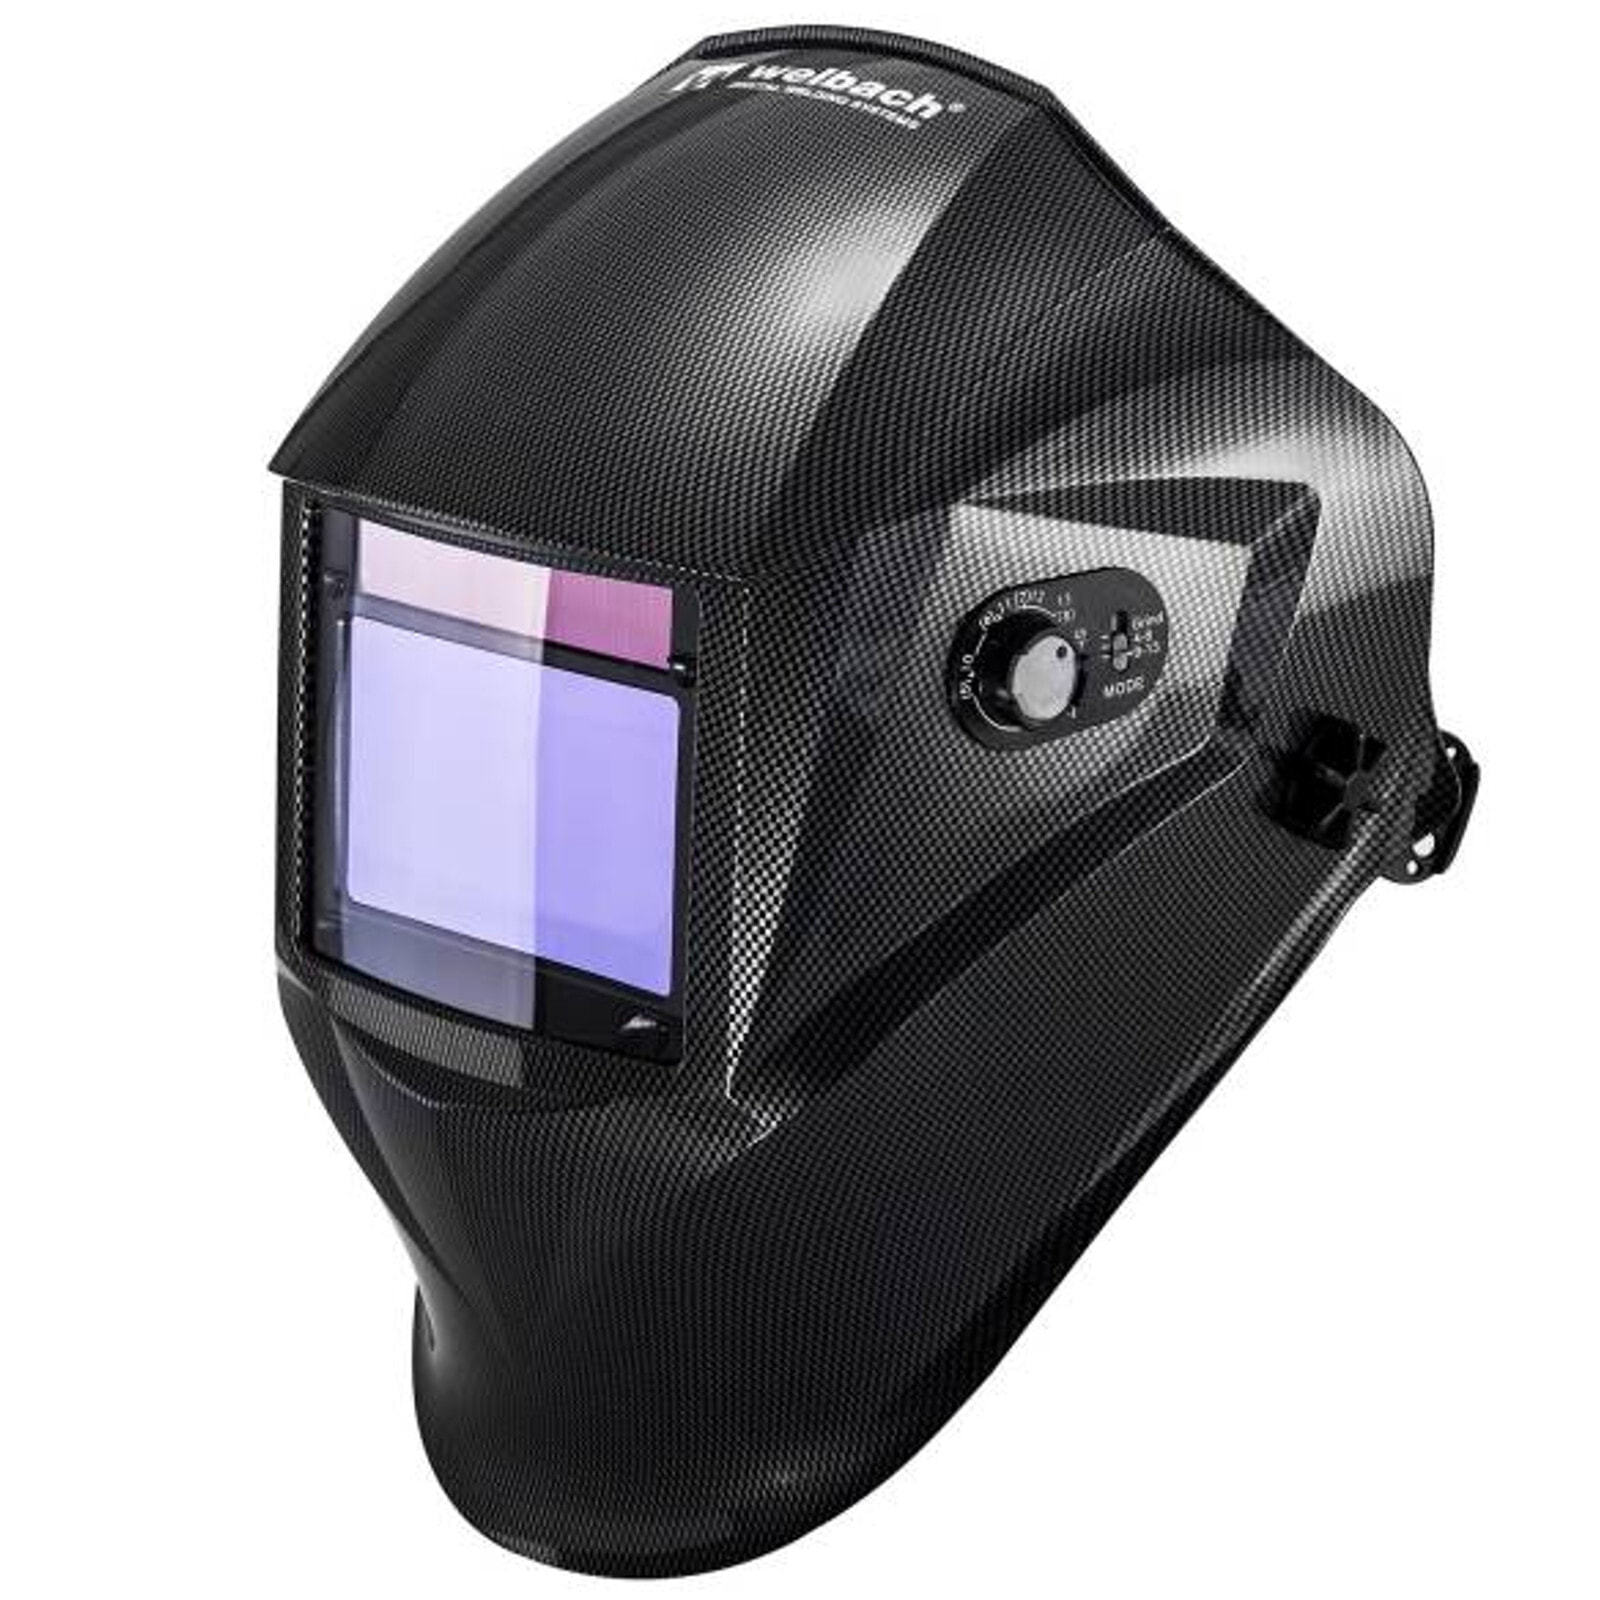 Automatic self-darkening welding helmet mask with grind function CARBONIC PROFESSIONAL